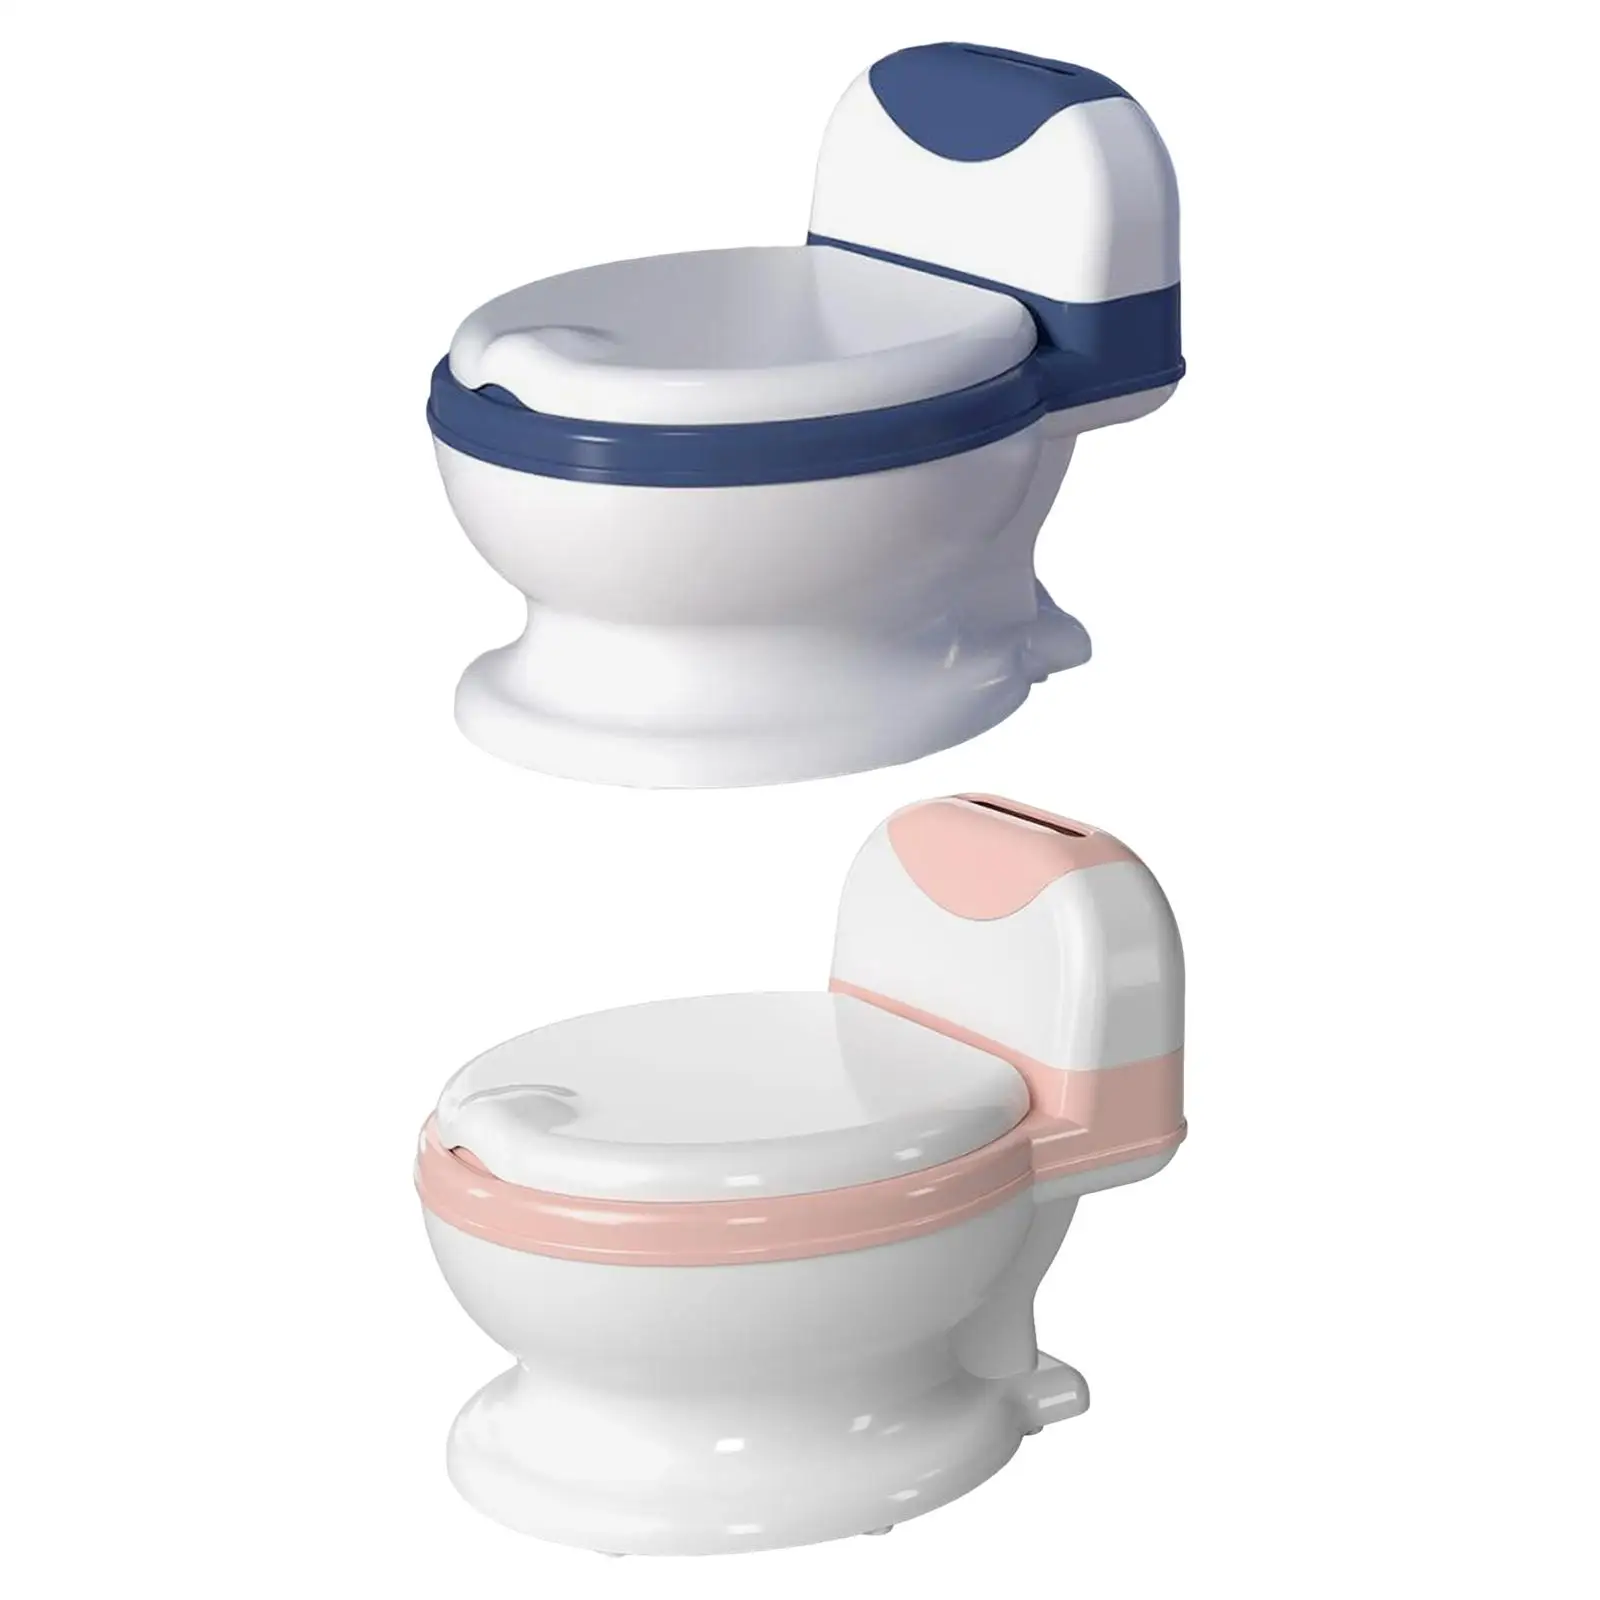 Potty Toilet (Brush Included) PU Seat Ring Removable Potty Pot Compact Size for Home Indoor Outdoor Ages 0-8 Infants